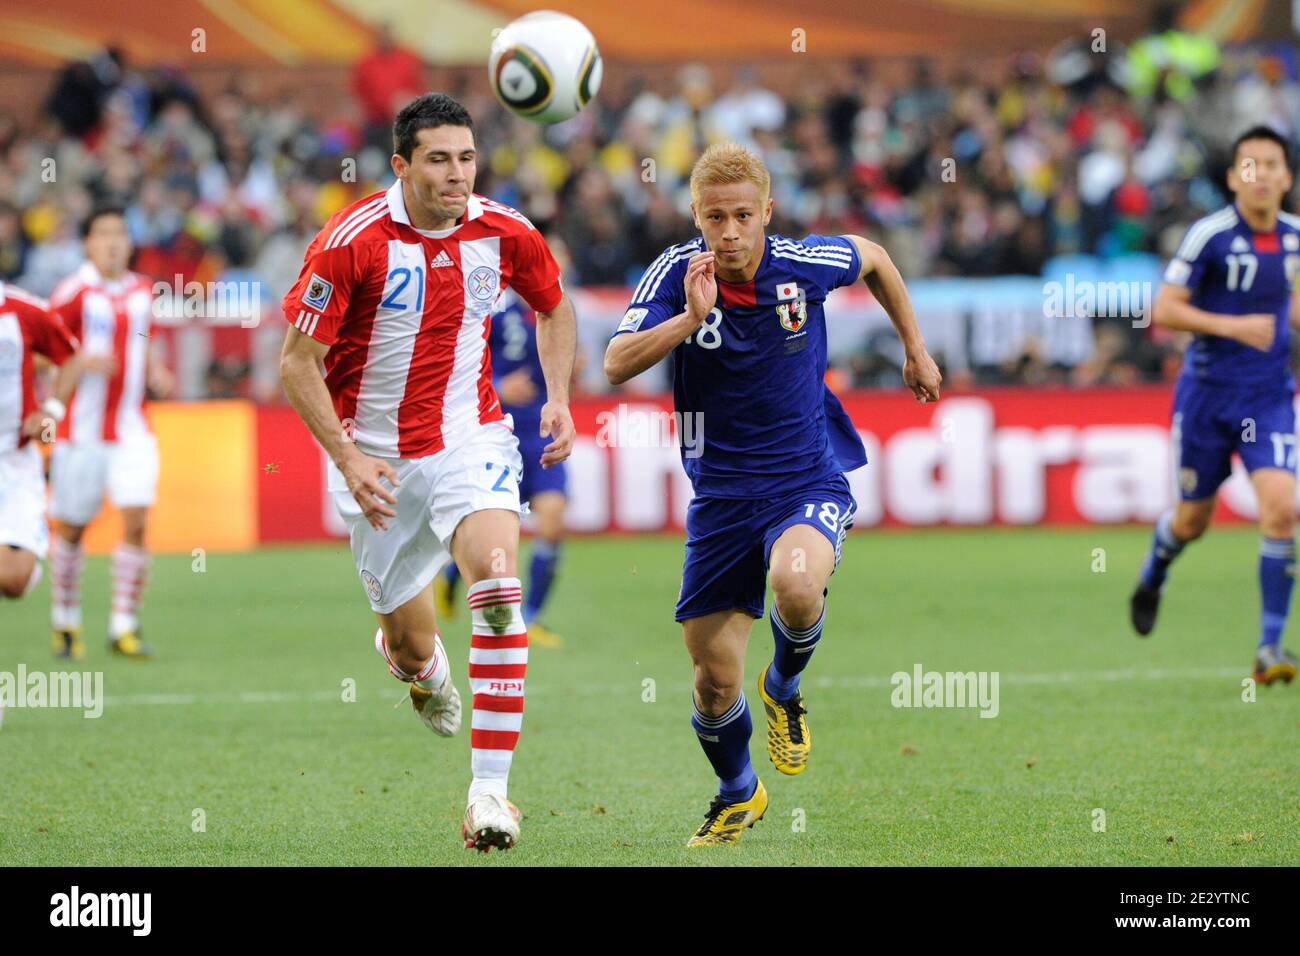 Paraguay's Antolin Alcaraz and Japan's Keisuke Honda fight for the ball during the 2010 FIFA World Cup South Africa 1/8 of final Soccer match, Paraguay vs Japan at Loftus Versfeld football stadium in Pretoria, South Africa on June 29, 2010. Paraguay won 0-0 (5p to 3 after penalties). Photo by Henri Szwarc/ABACAPRESS.COM Stock Photo